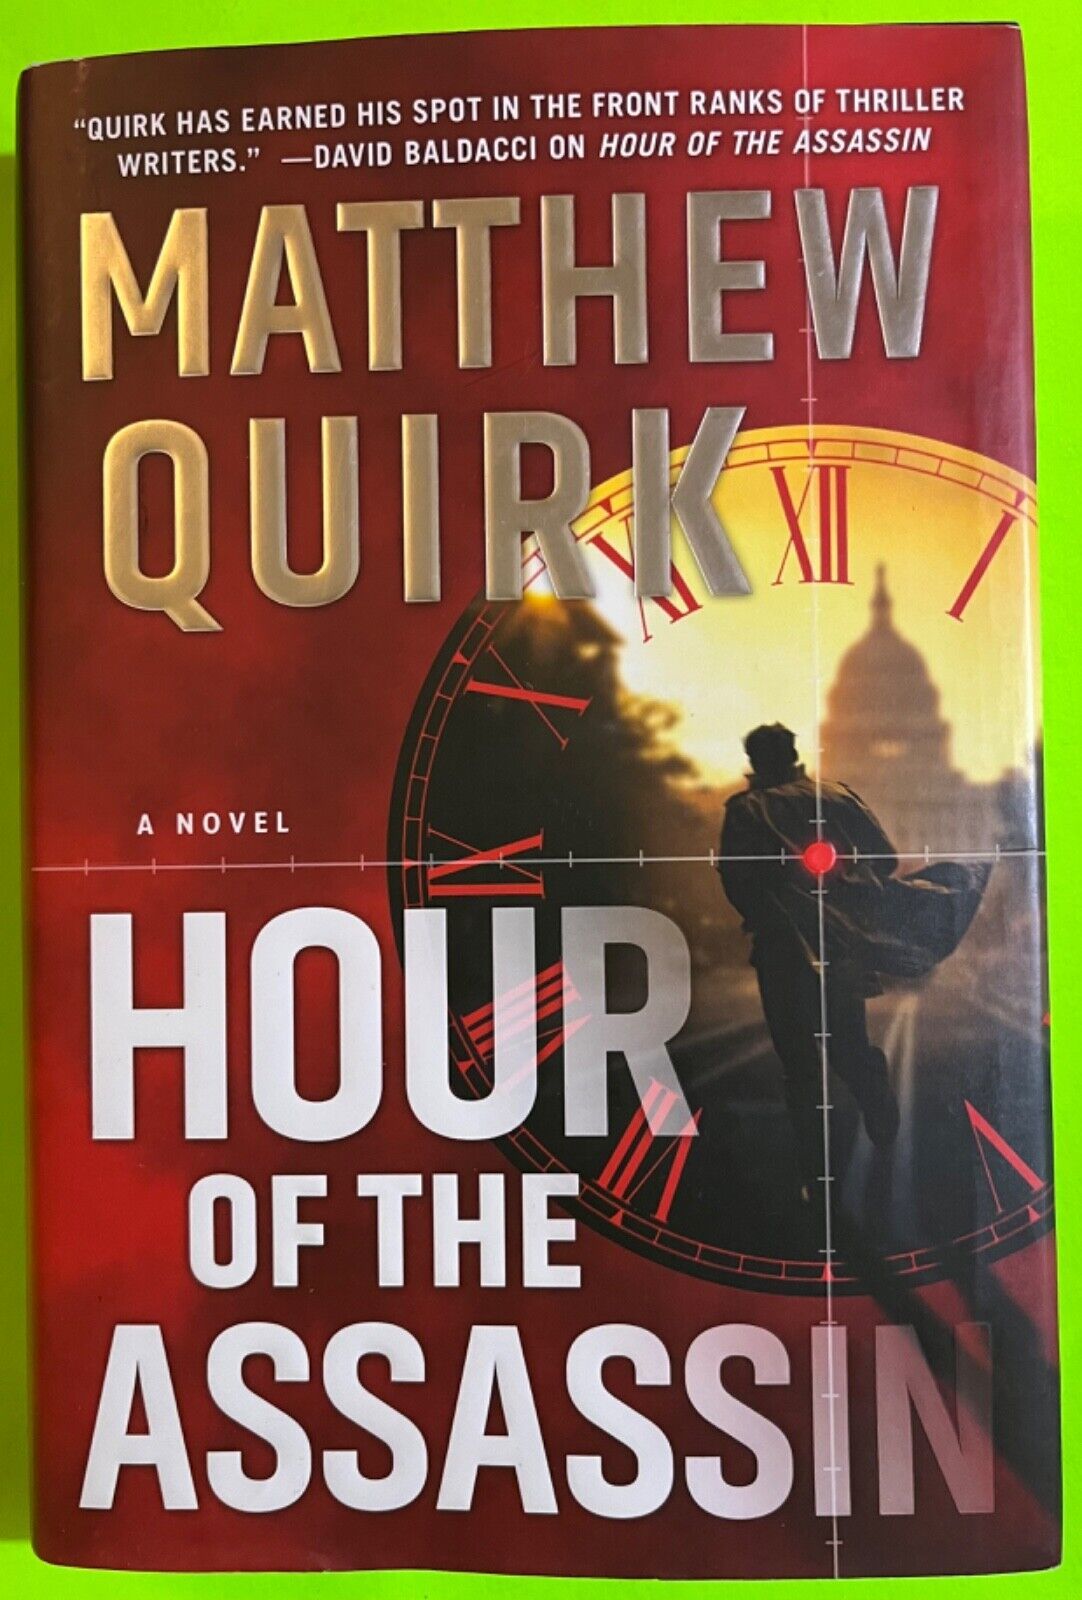 Primary image for Hour of the Assassin: A Novel by Matthew Quirk, WM (HCDJ 2020)